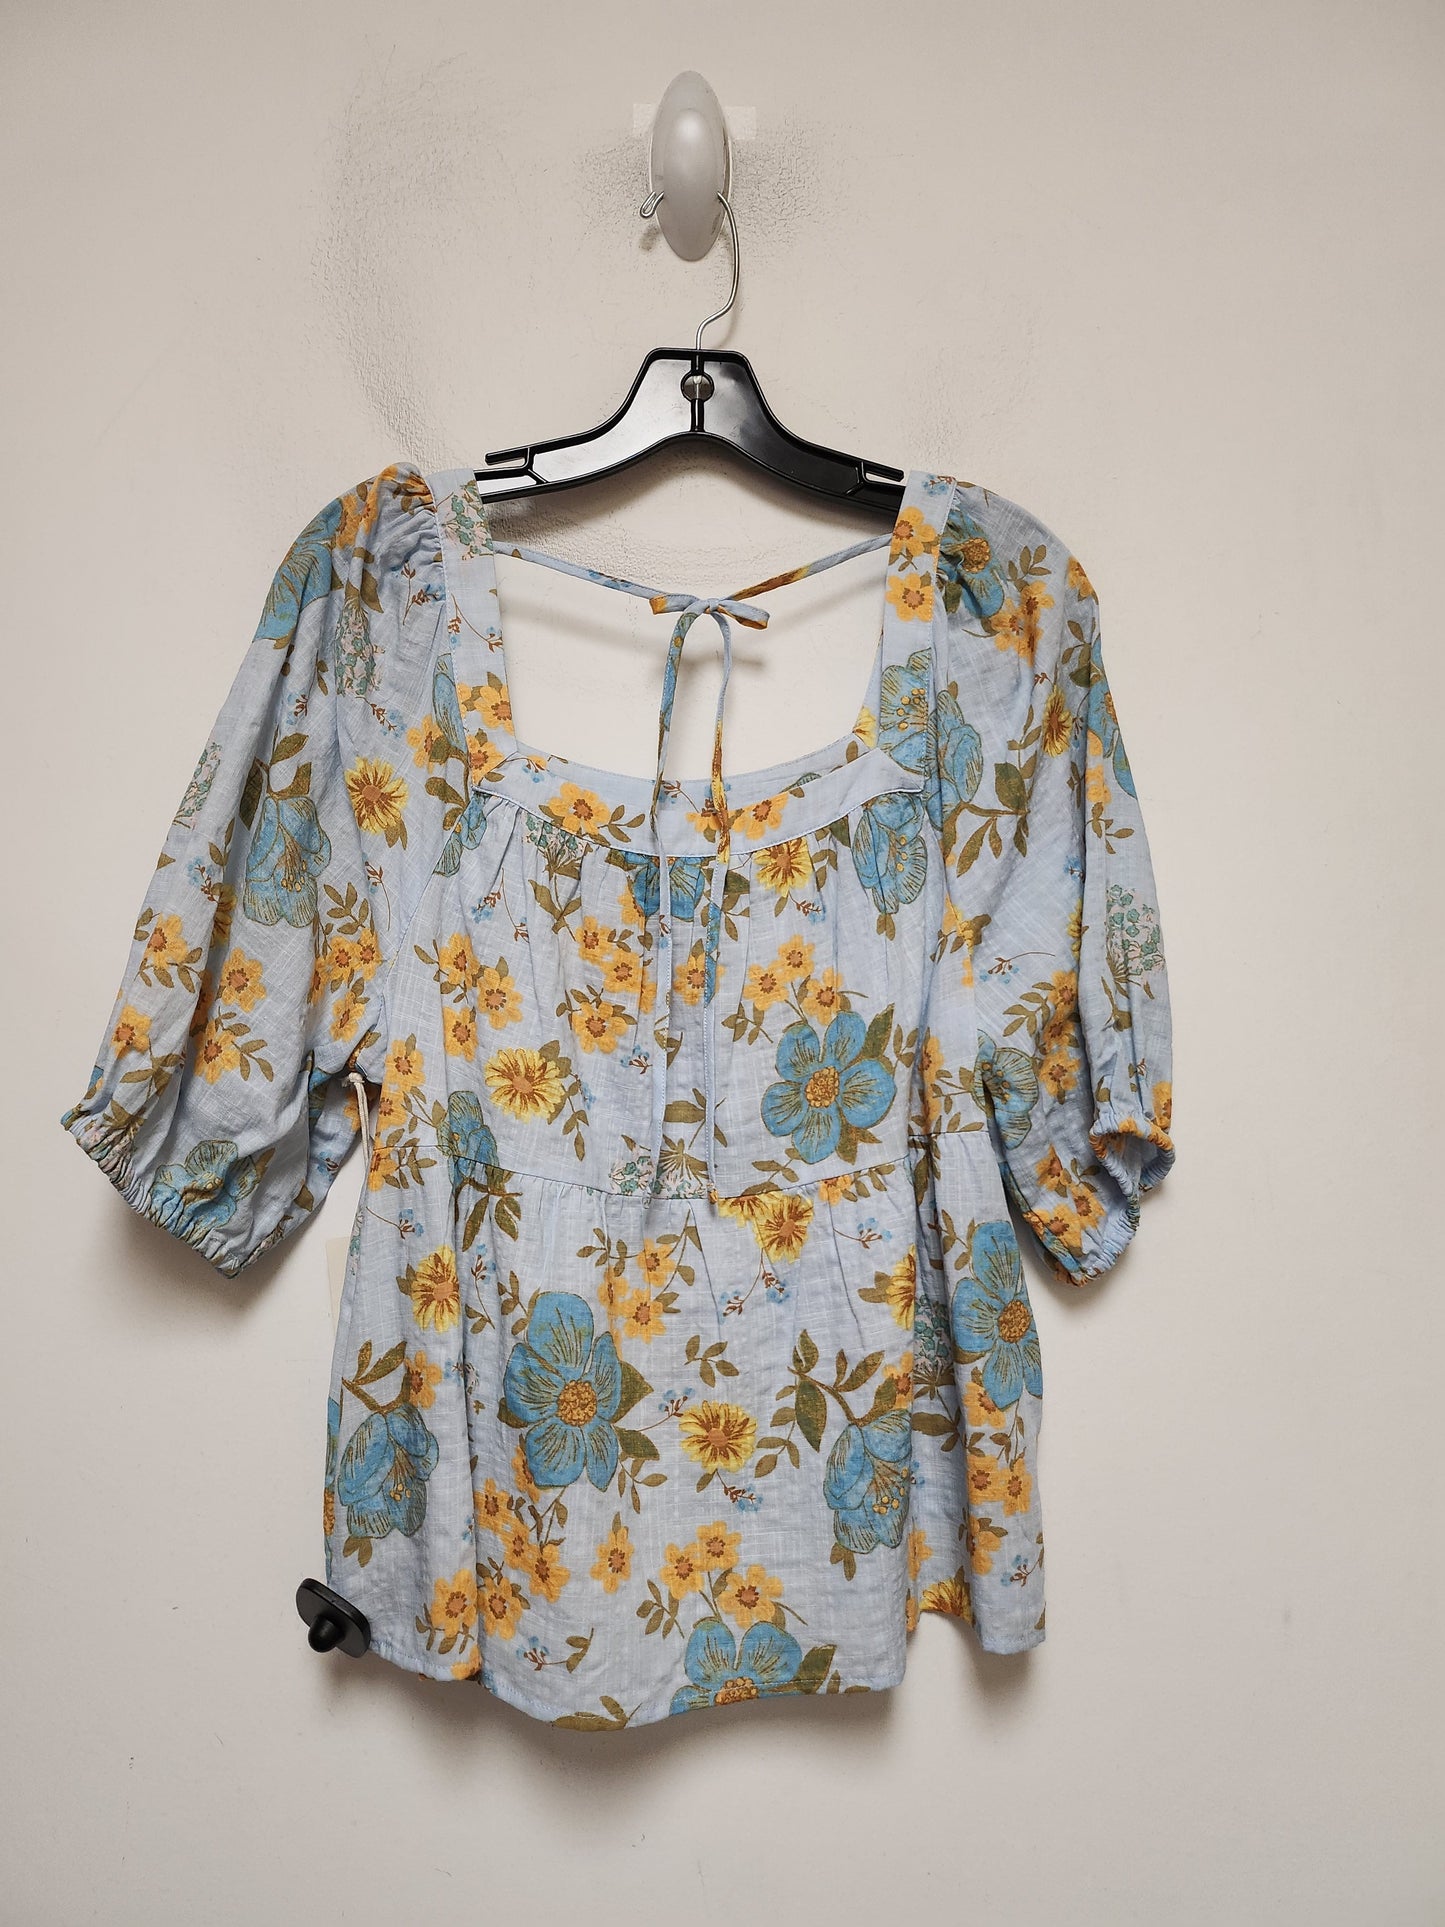 Floral Print Top Short Sleeve Ana, Size M